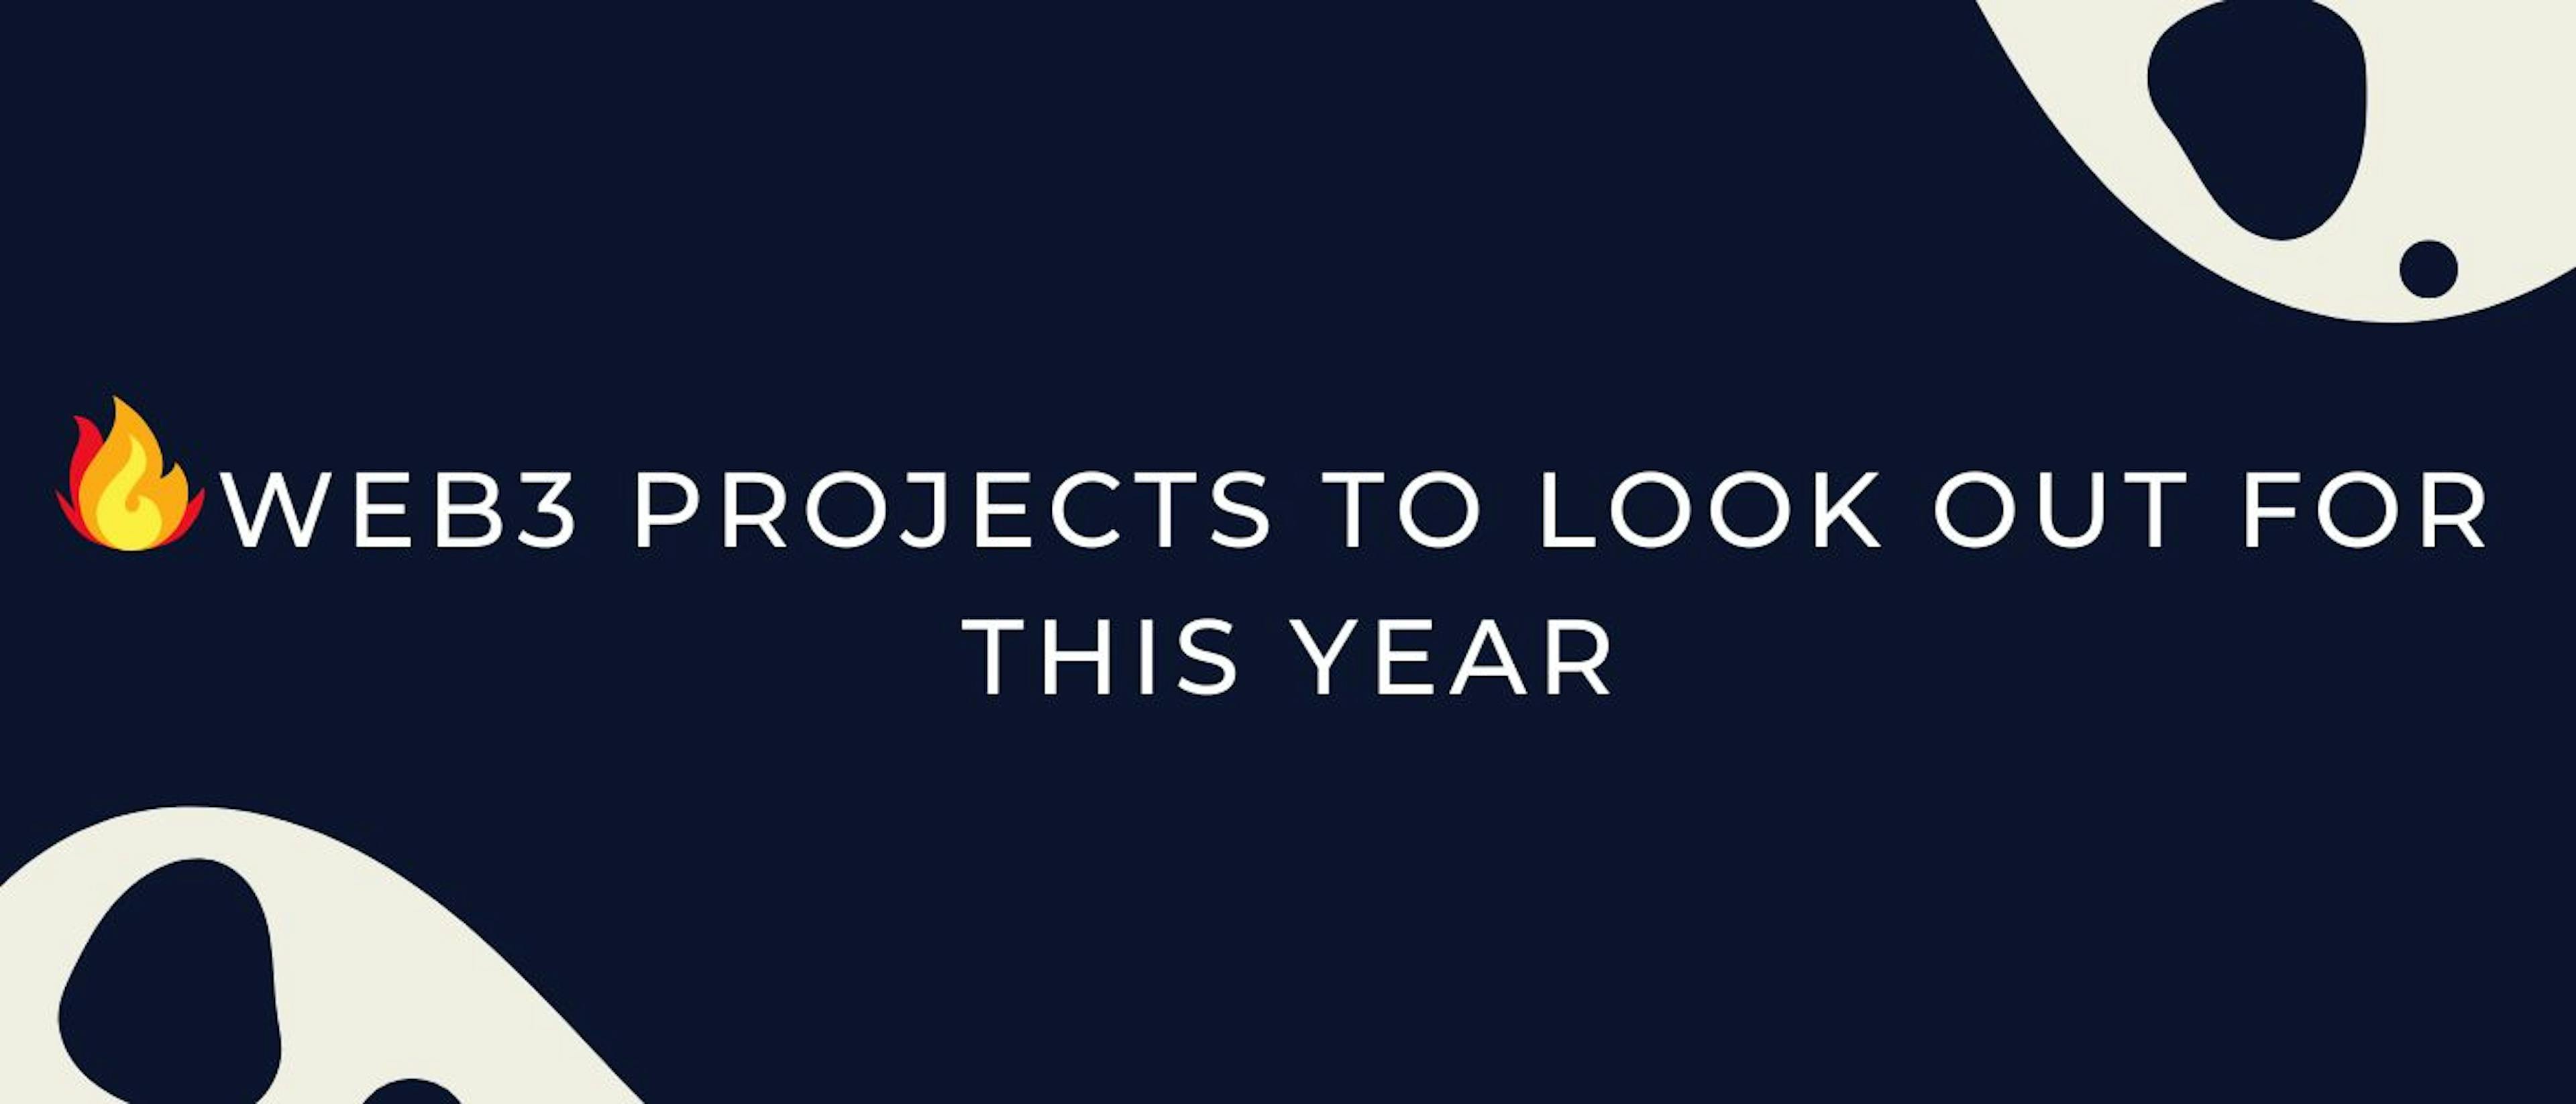 featured image - Web3 Projects to Look Out for In 2023